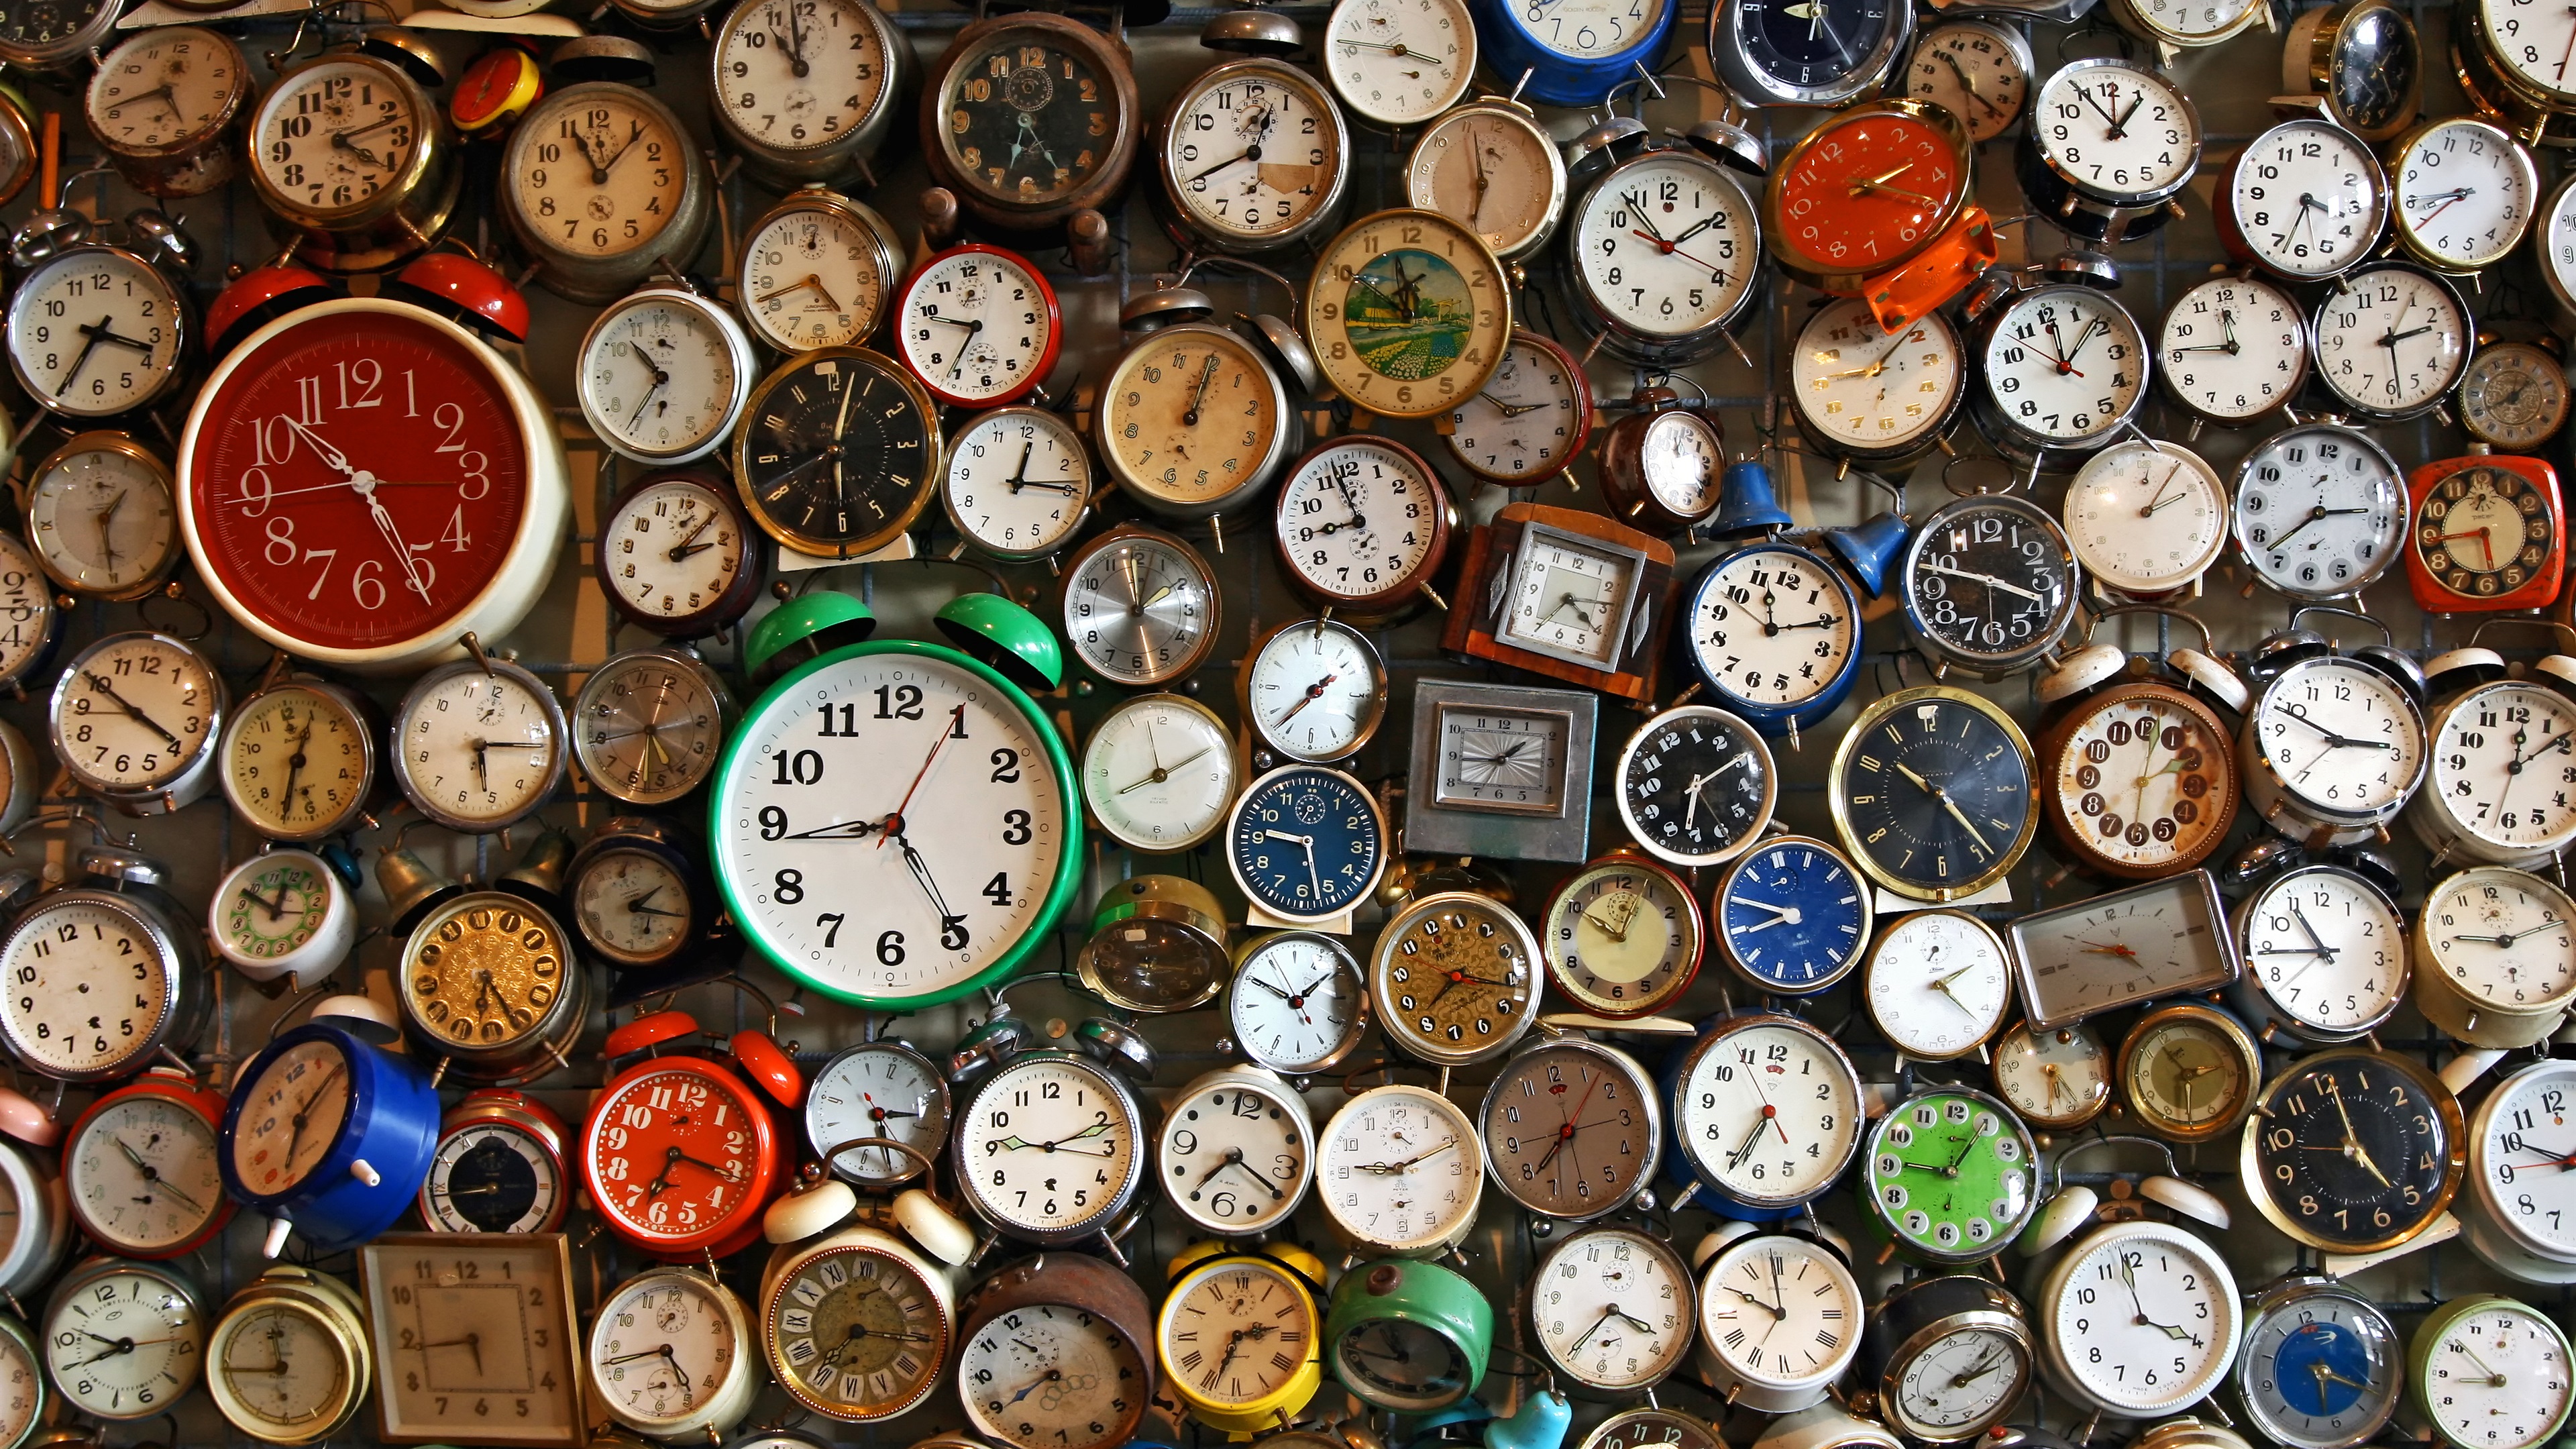 Wallpaper Many Watches, Alarm Clocks, Time Counter - Time Clock Wallpaper Hd - HD Wallpaper 